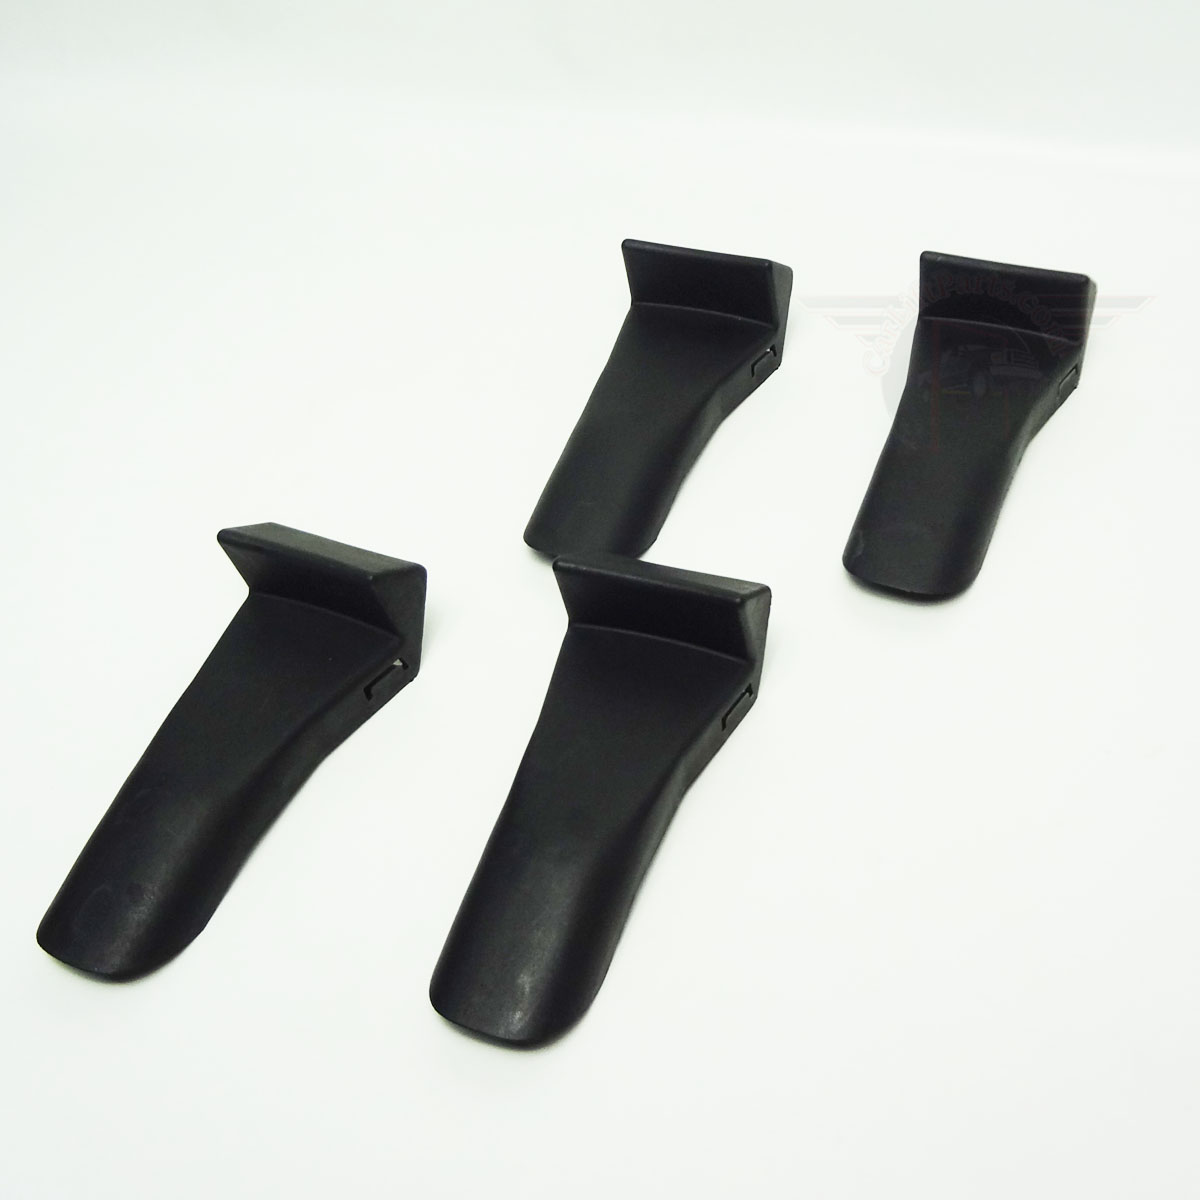 Jaw Cover Wheel Protectors fits Coats®* Tire Changer Clamp Guards set of 4